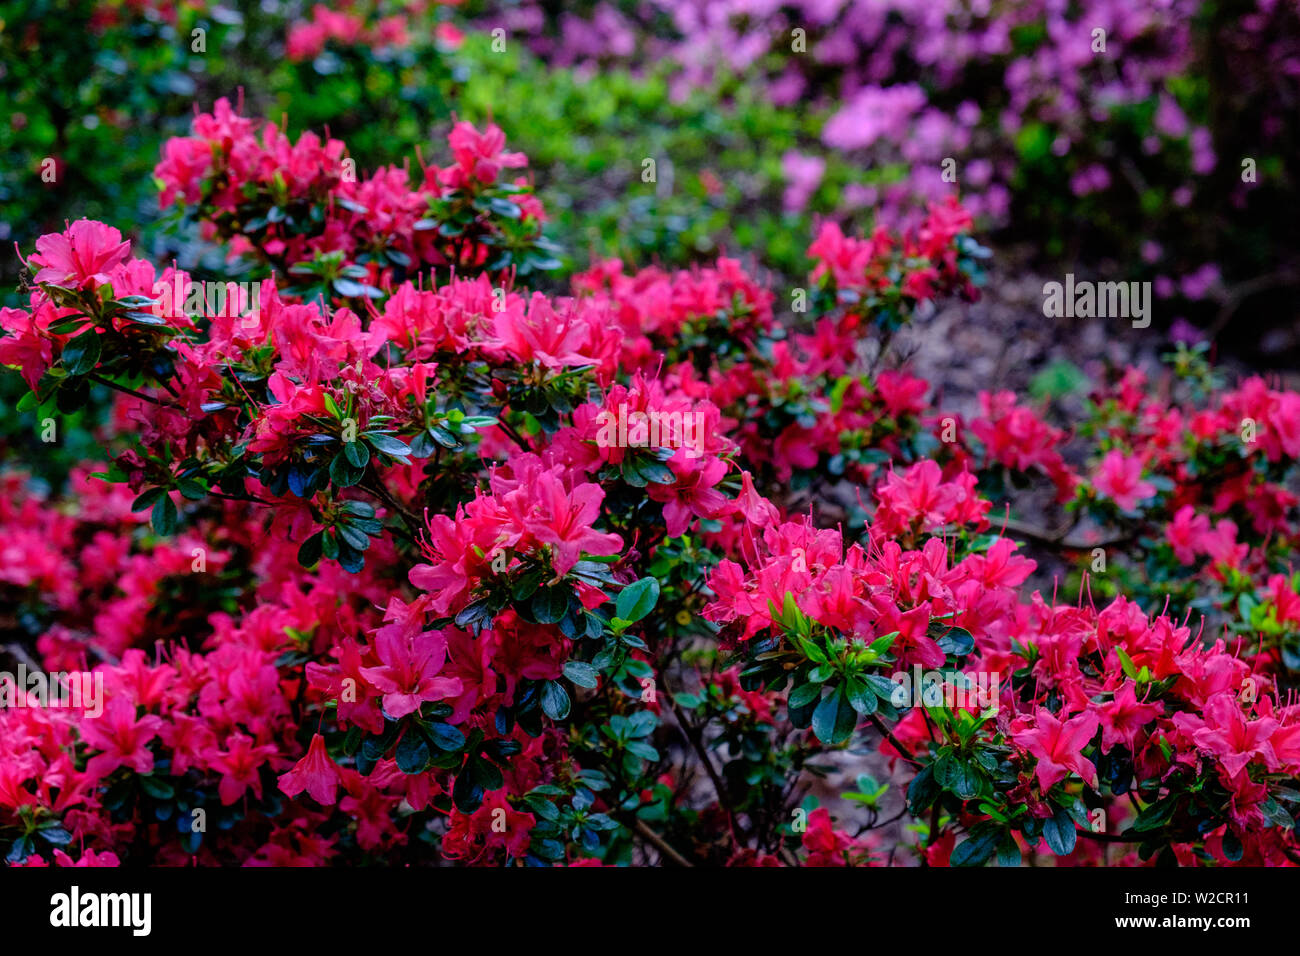 White Rhododendron Blossoms Stock Photos White Rhododendron